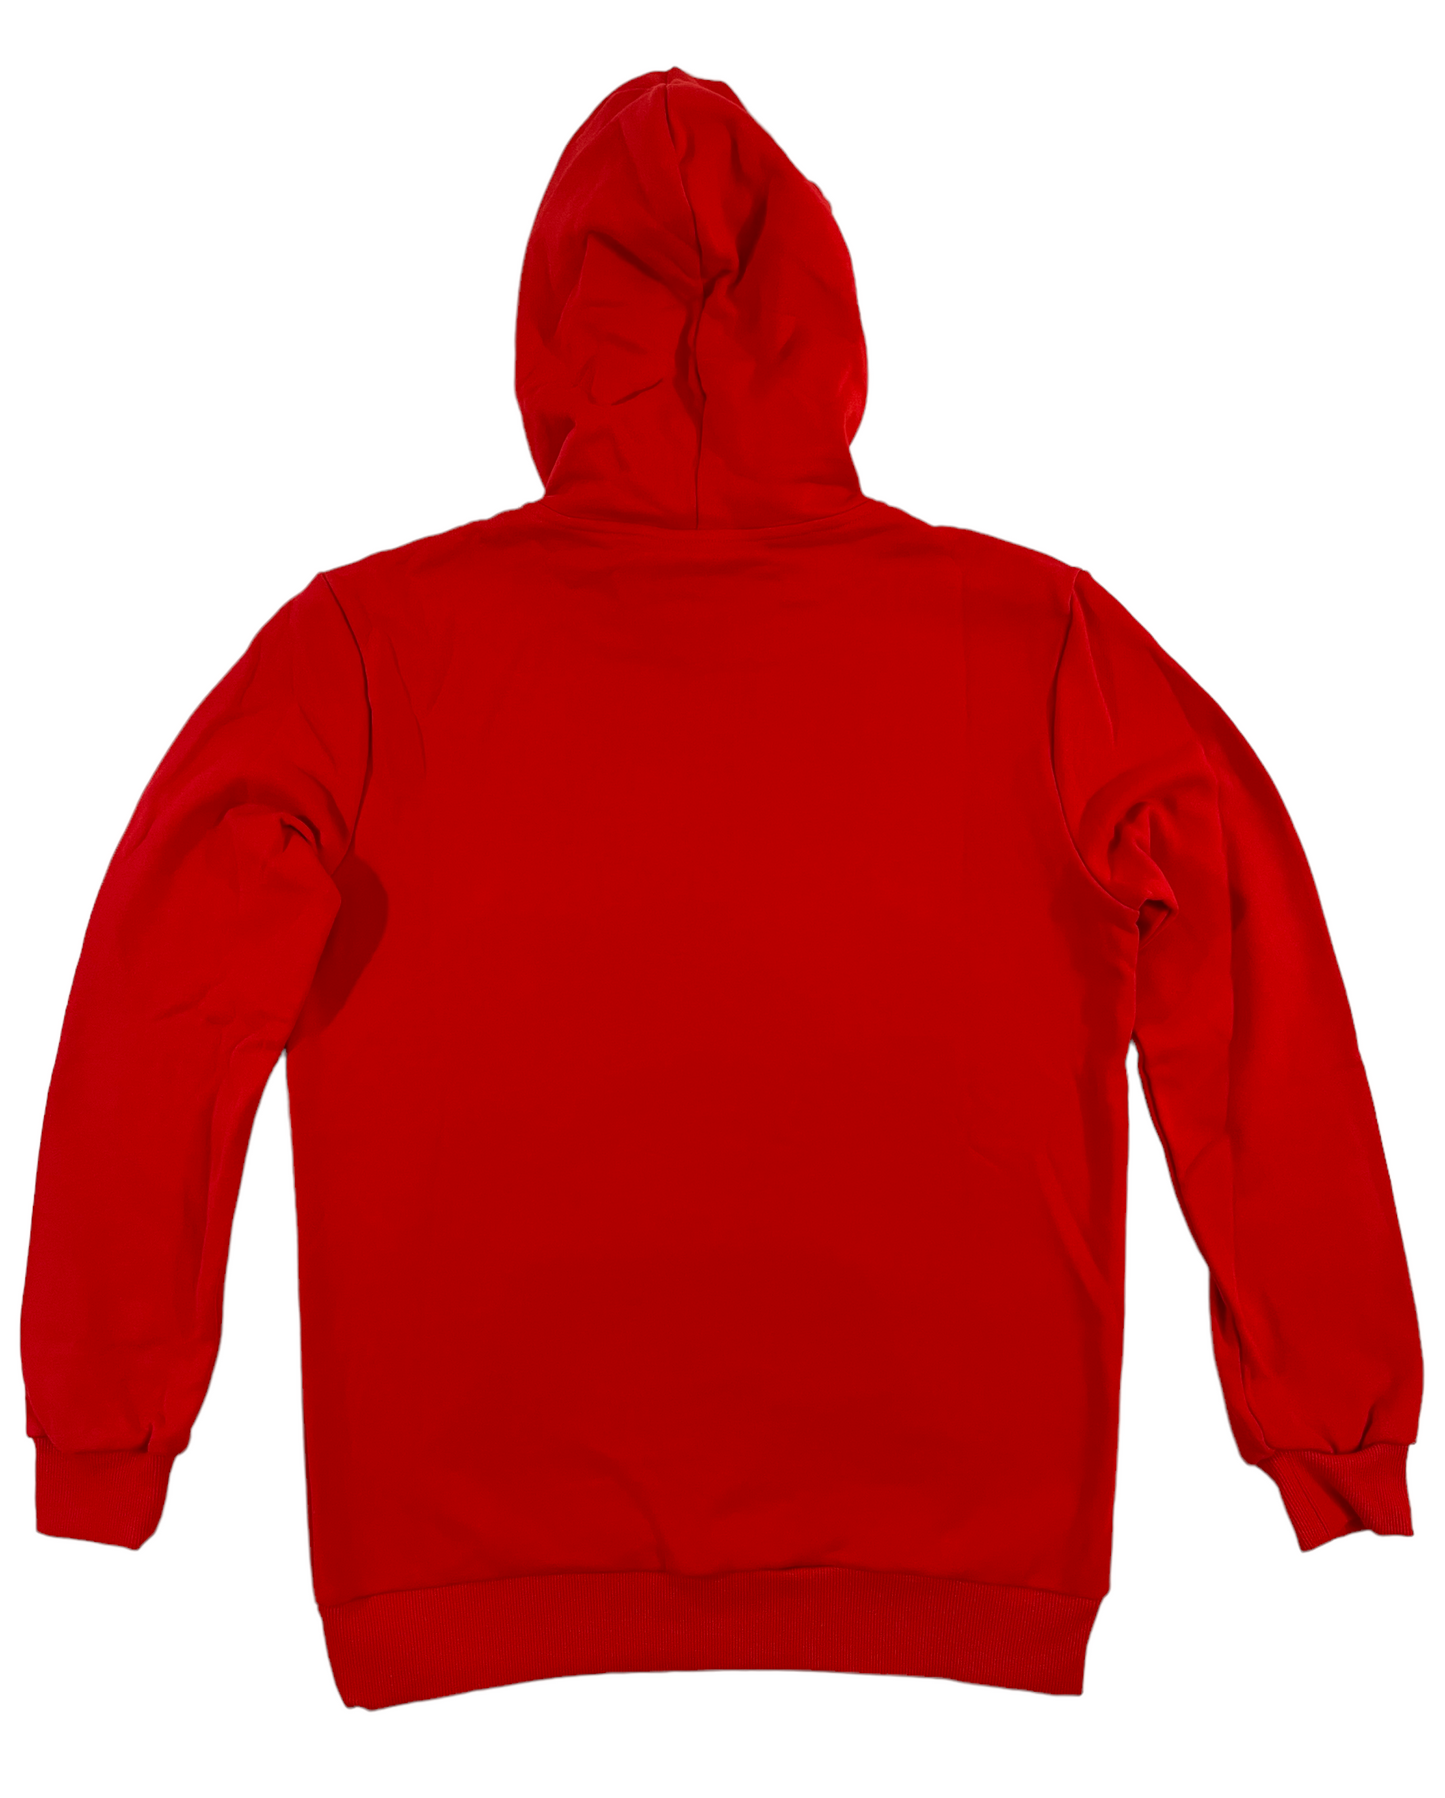 Hoodie - Red with White Embroidery